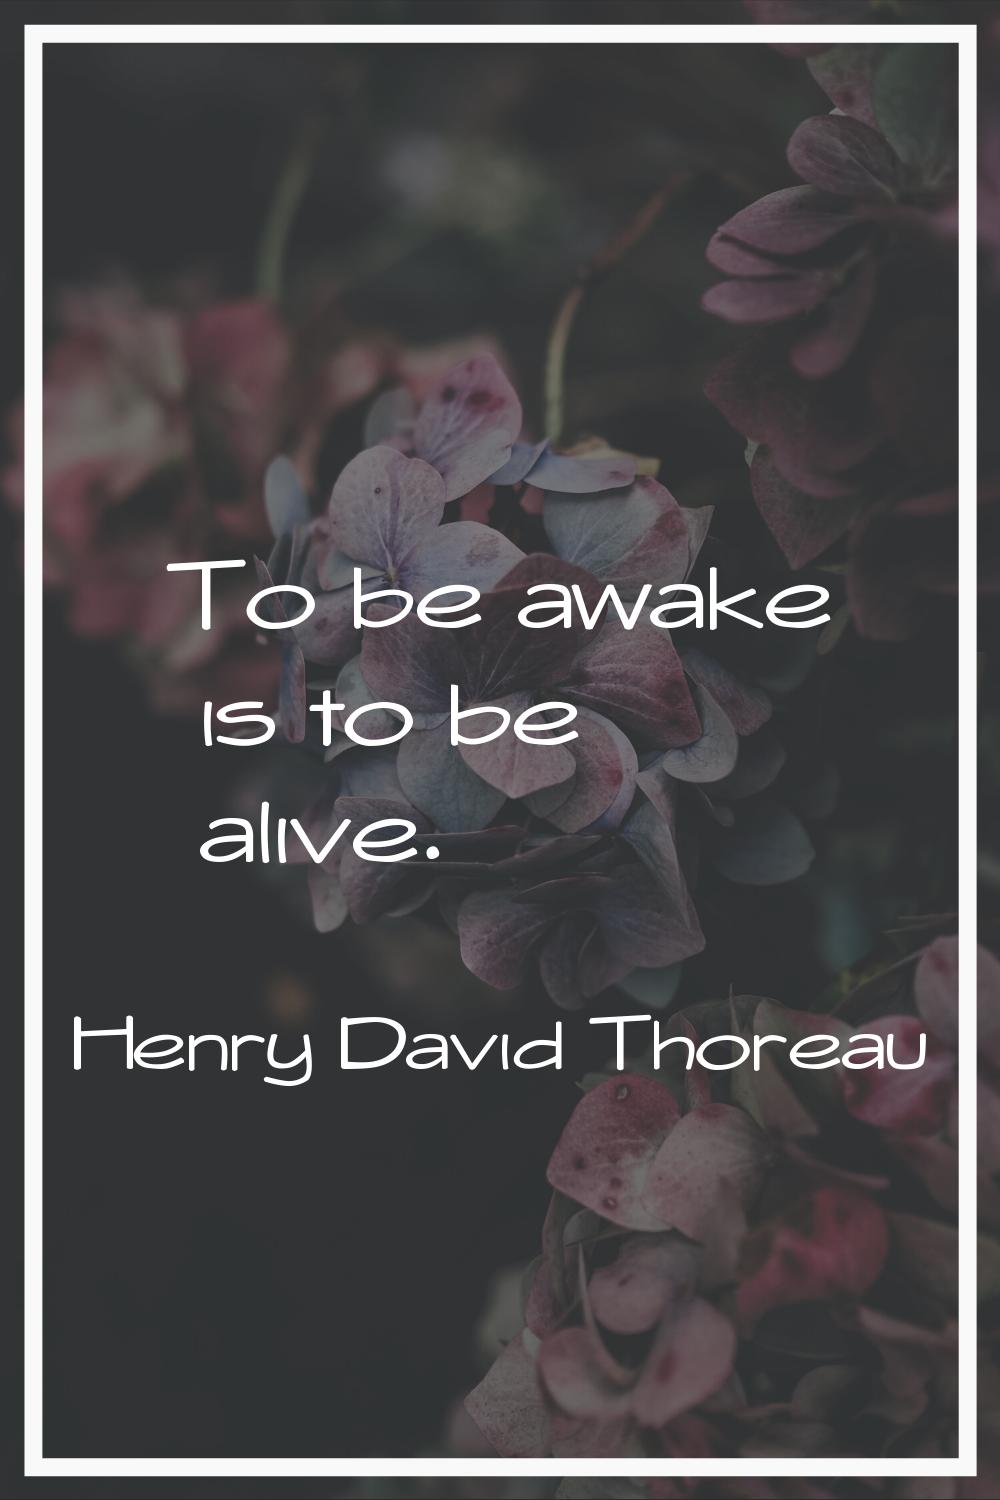 To be awake is to be alive.